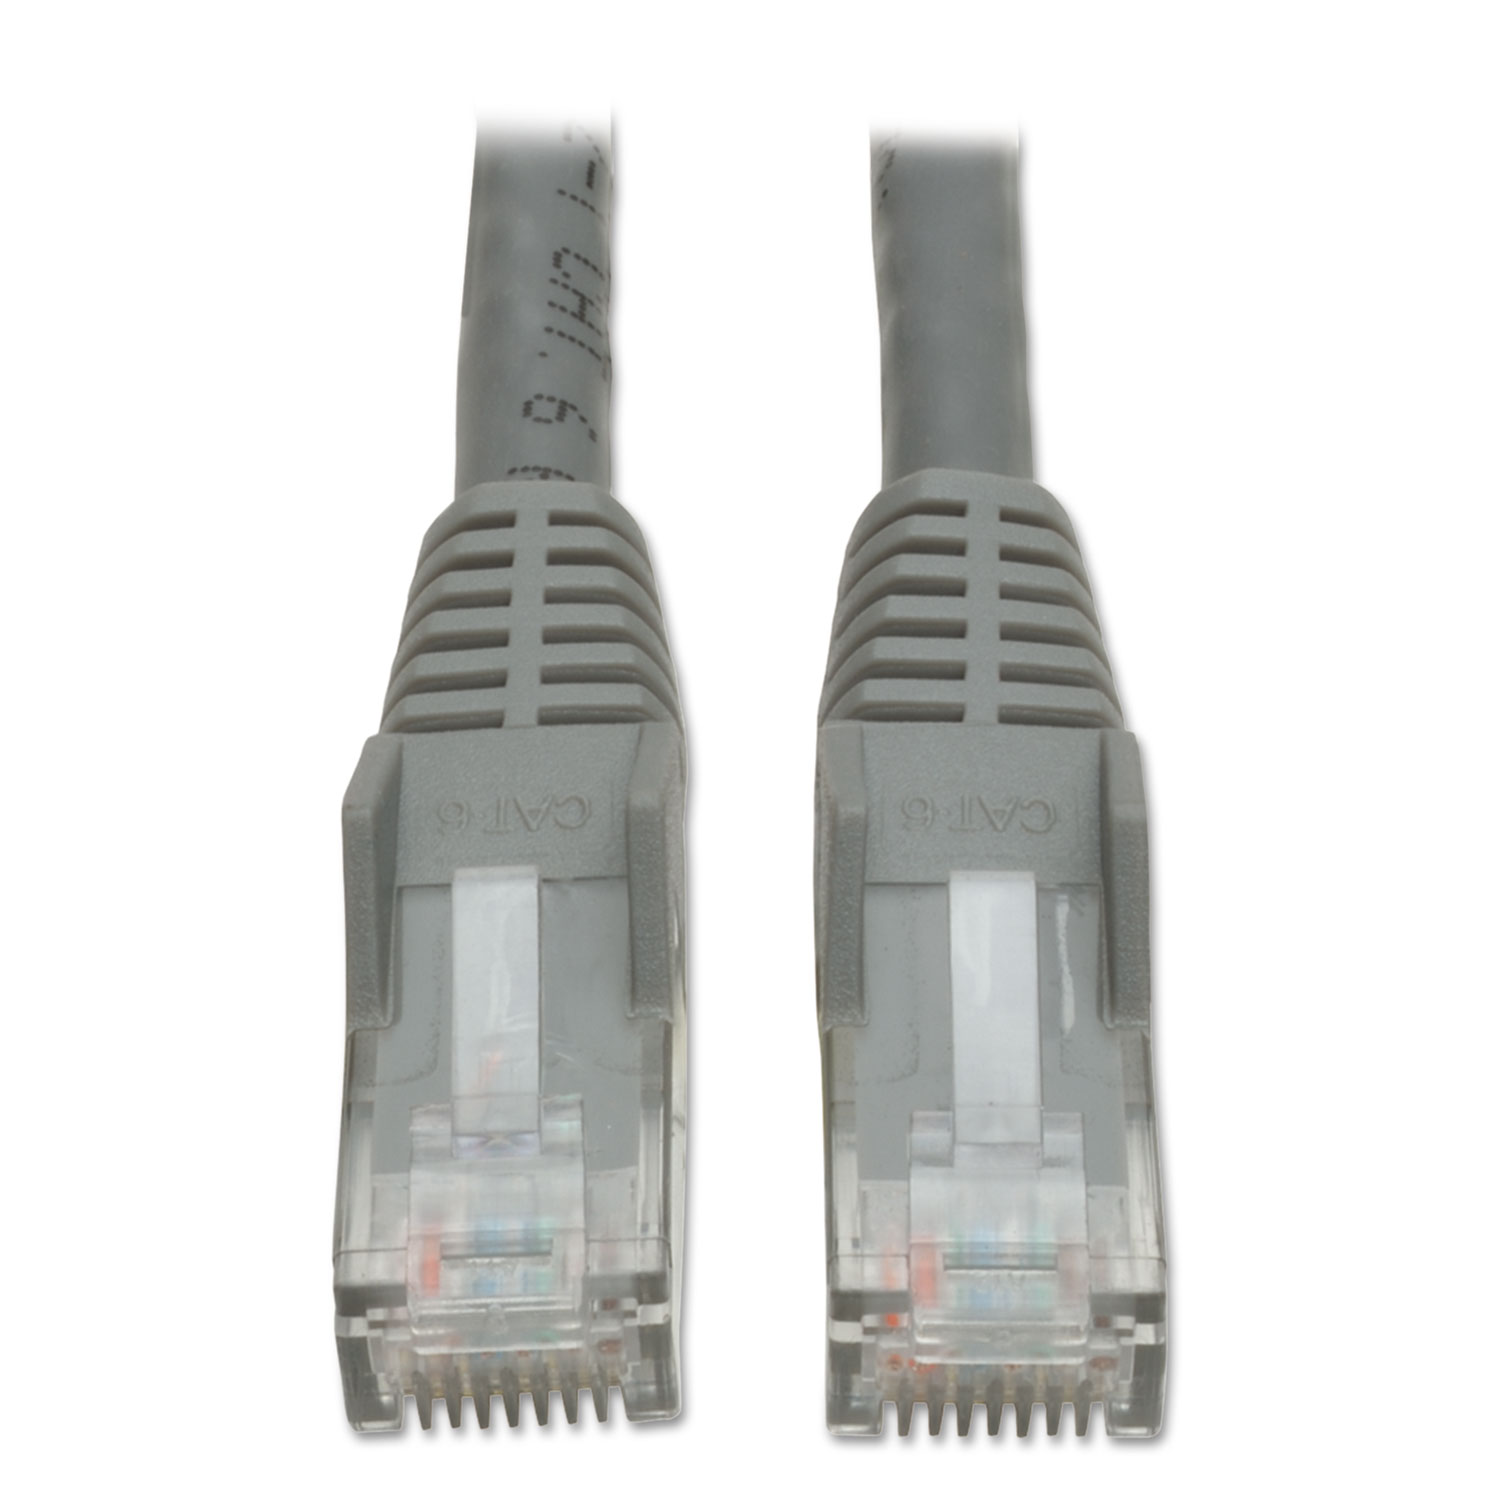  Tripp Lite N201-010-GY Cat6 Gigabit Snagless Molded Patch Cable, RJ45 (M/M), 10 ft., Gray (TRPN201010GY) 